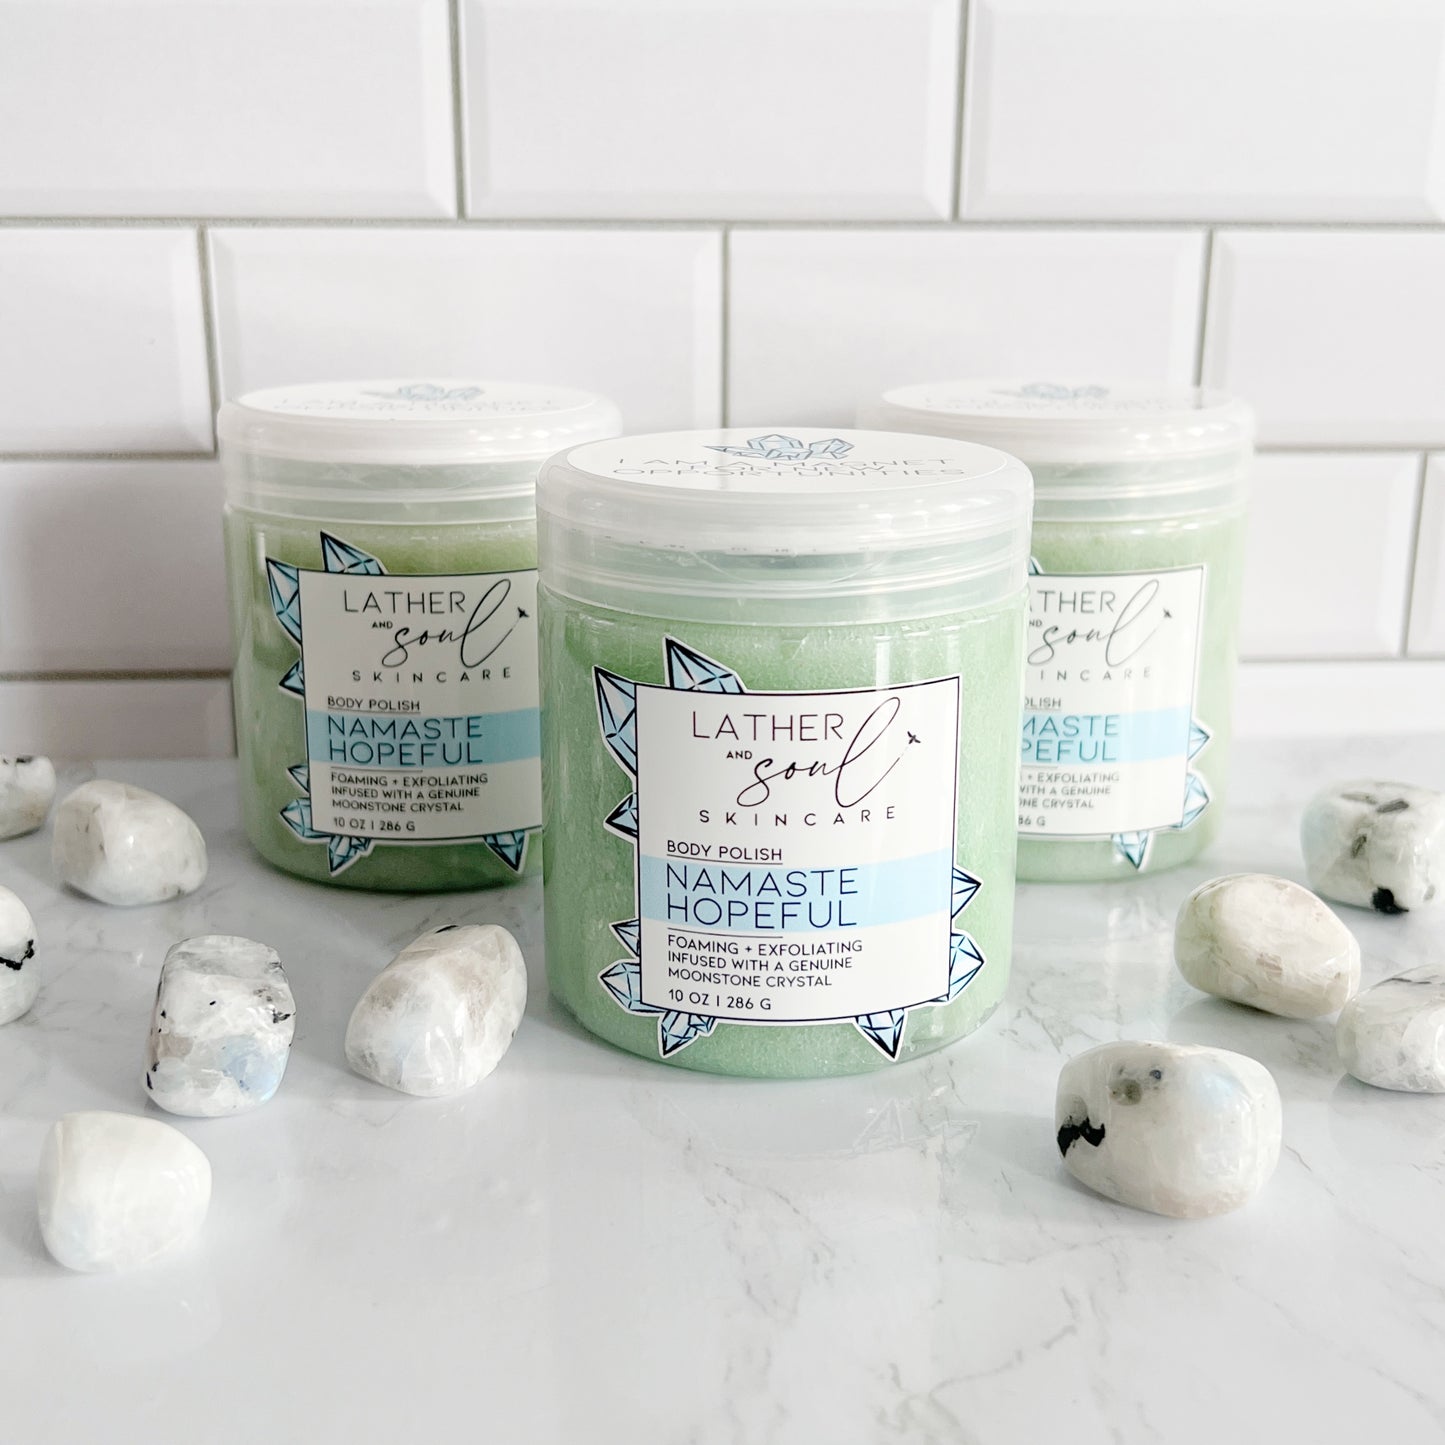 The best exfoliating body polish for smooth, soft skin, and made with organic ingredients.